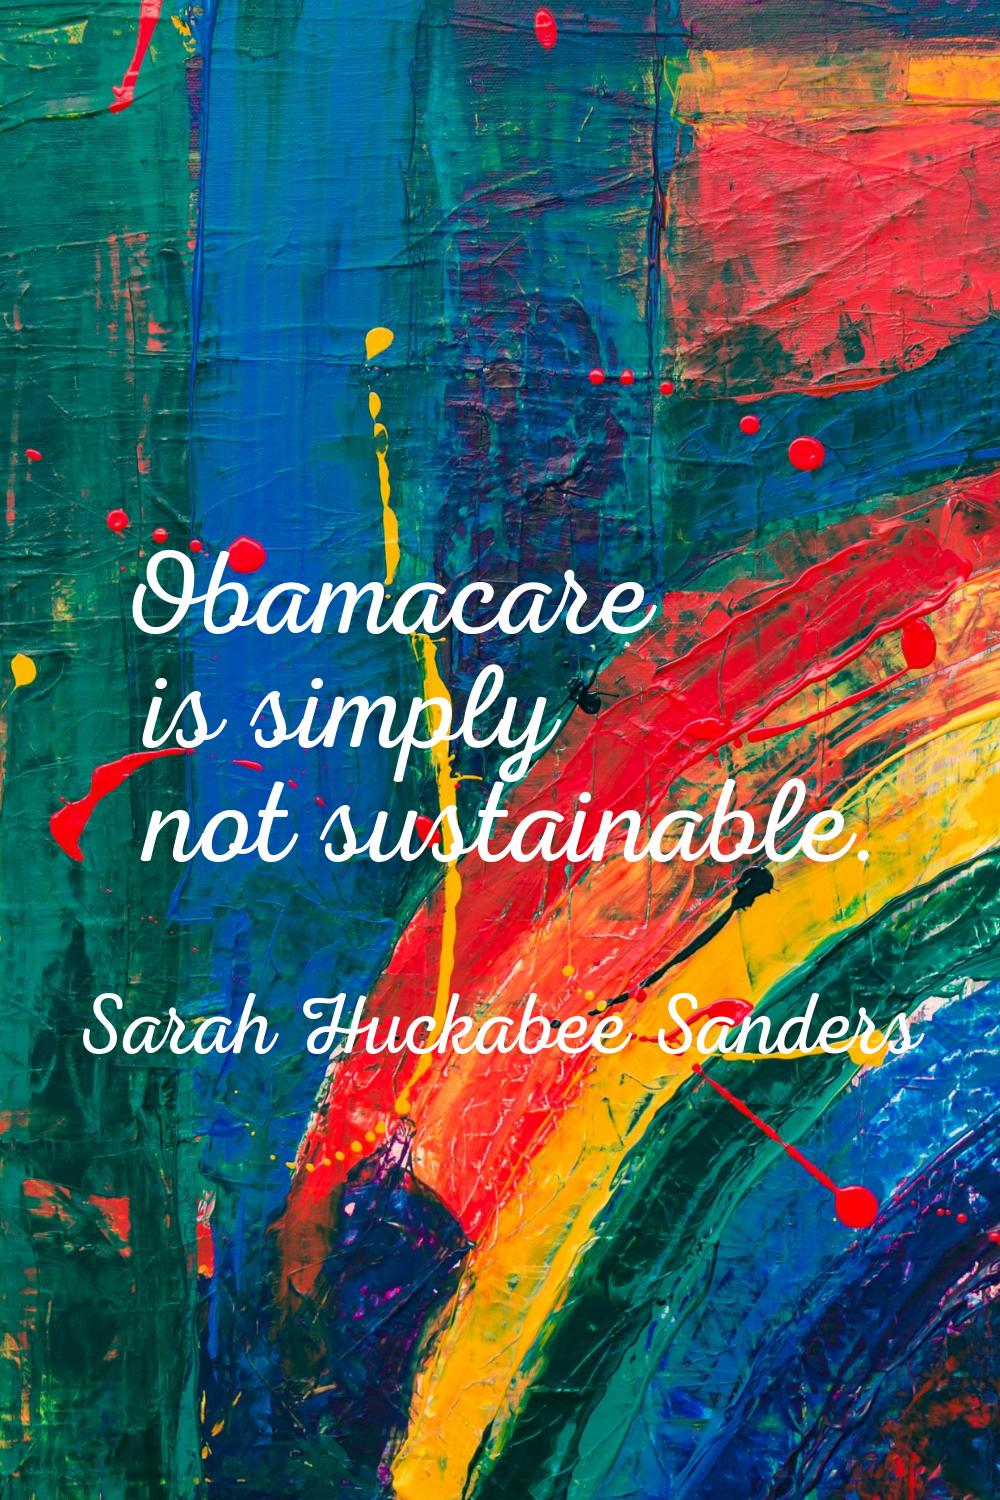 Obamacare is simply not sustainable.